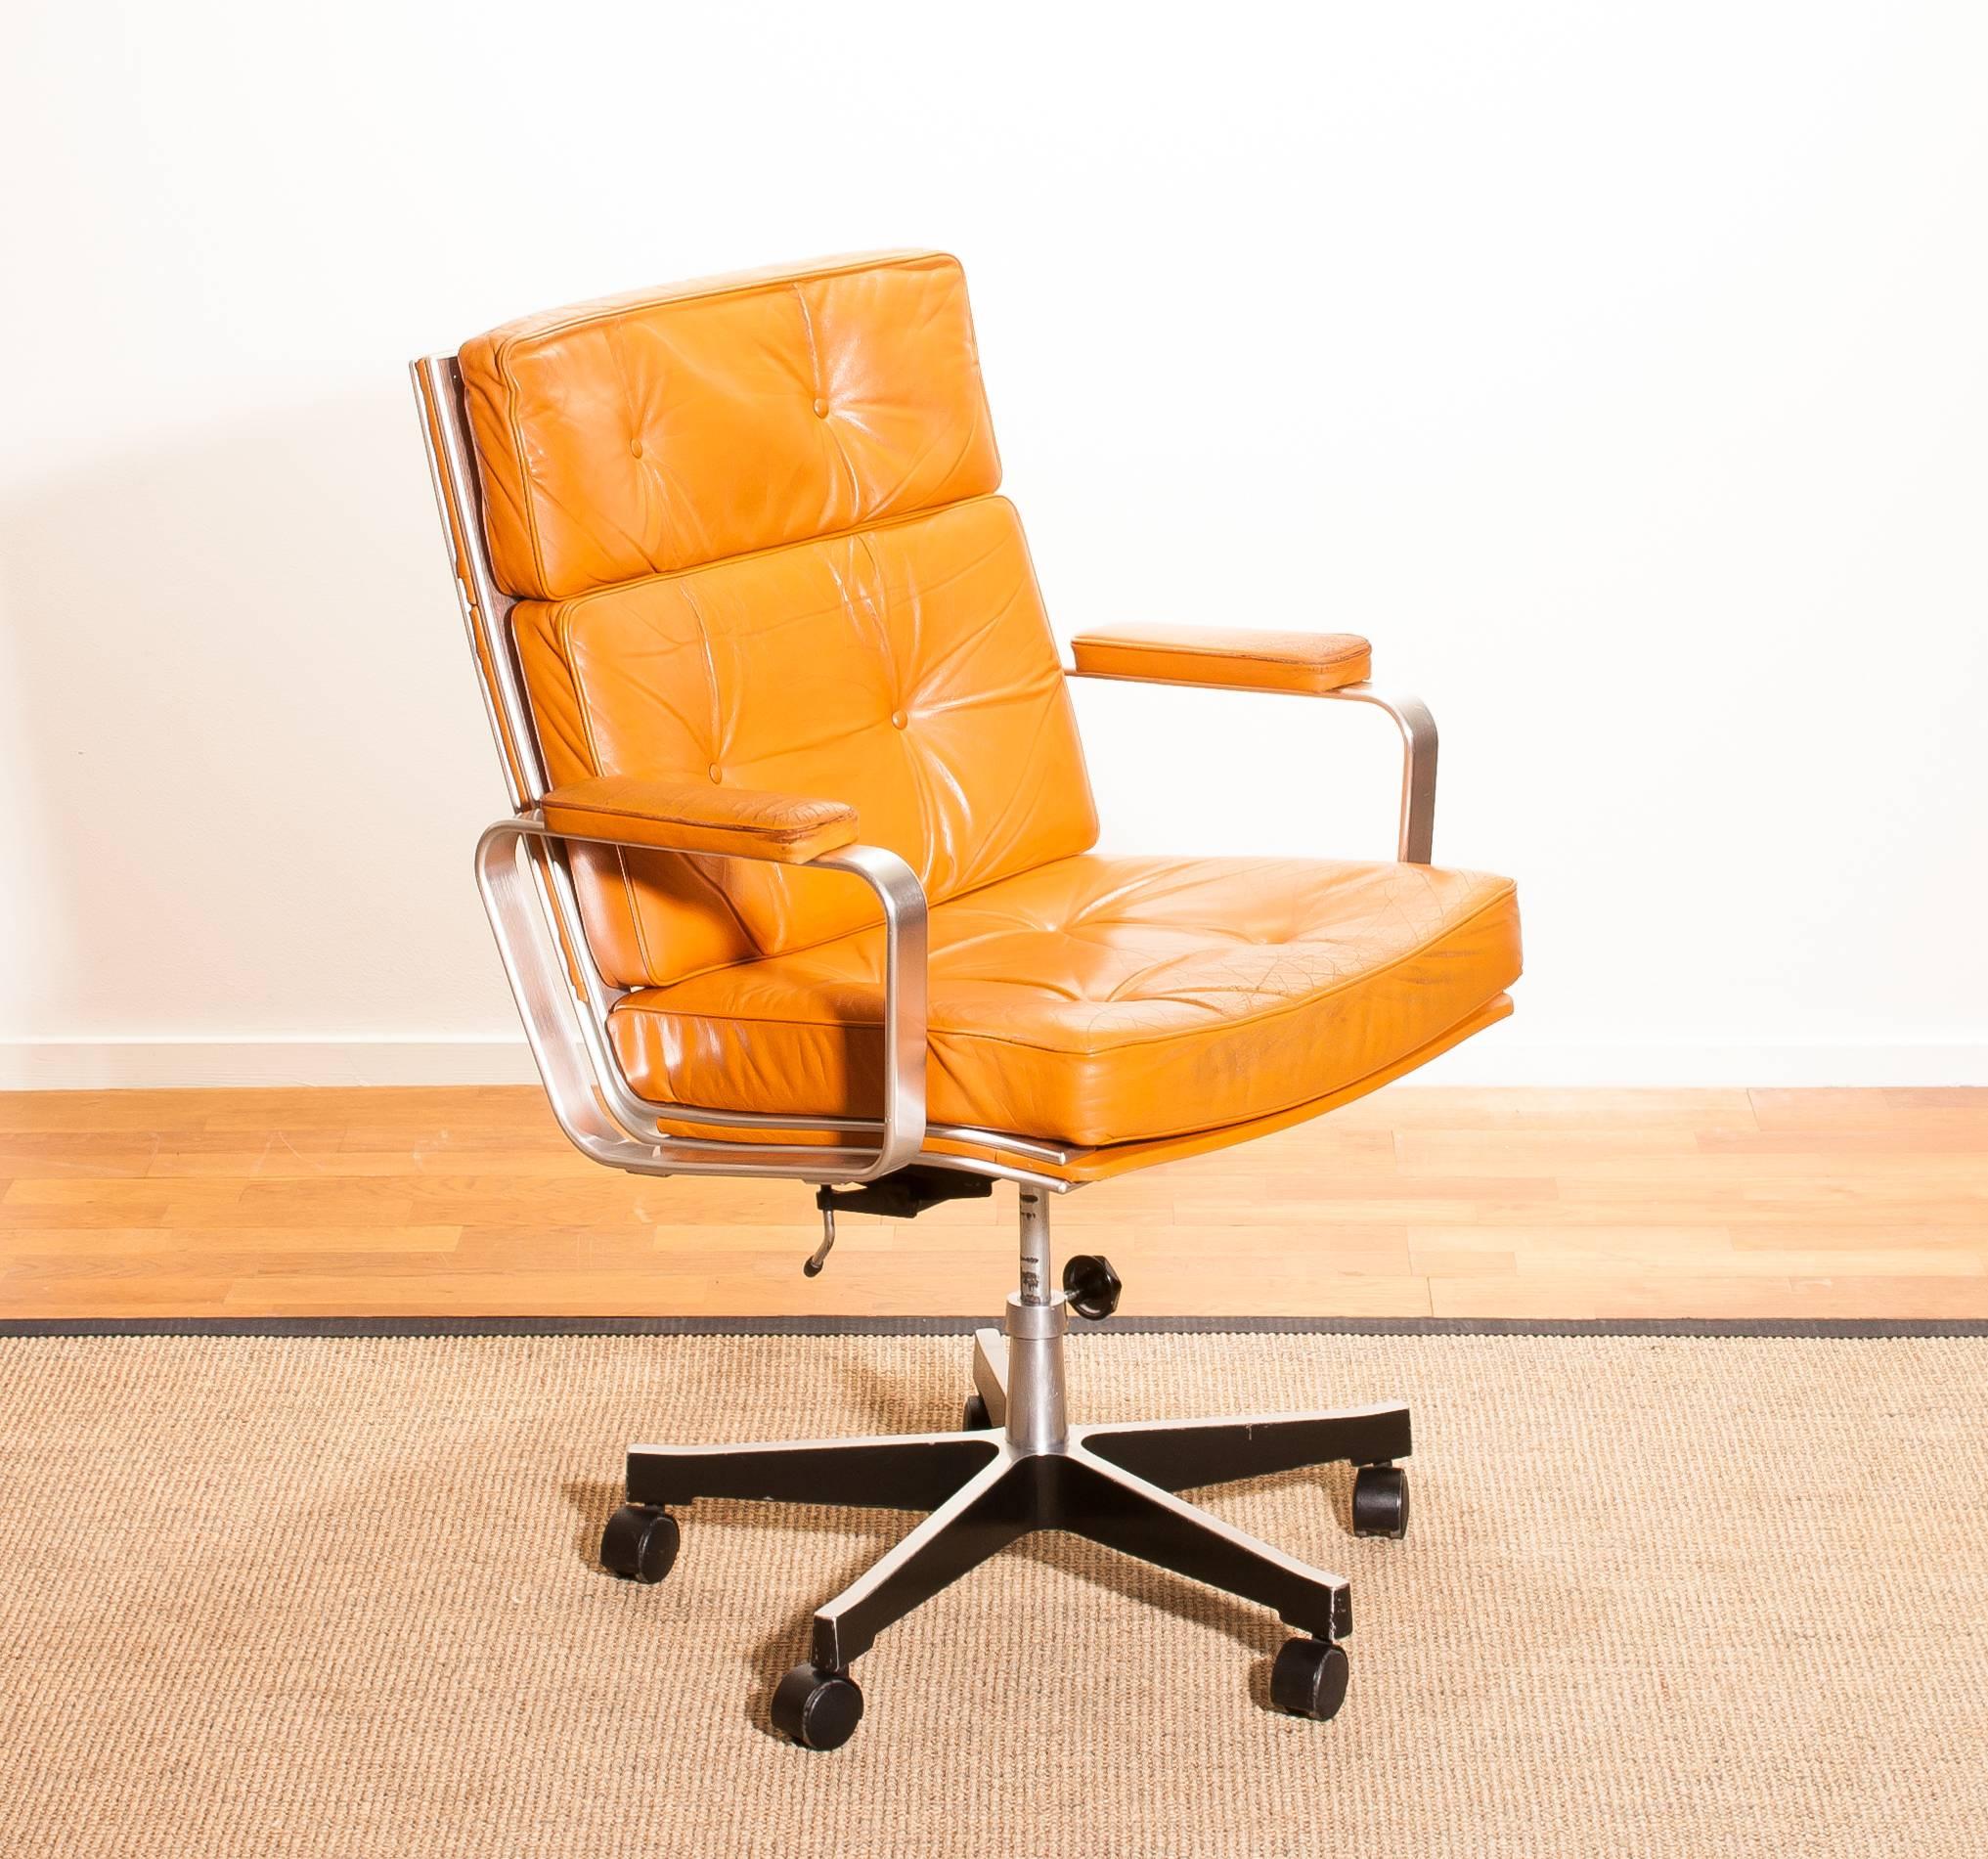 Beautiful adjustable office chair designed by Karl Erik Ekselius for JOC Möbler.
The nice thick solid cognac leather with an aluminium frame and steel five legs on wheels is a very nice combination.
The chair is very comfortable. 
It is in a very